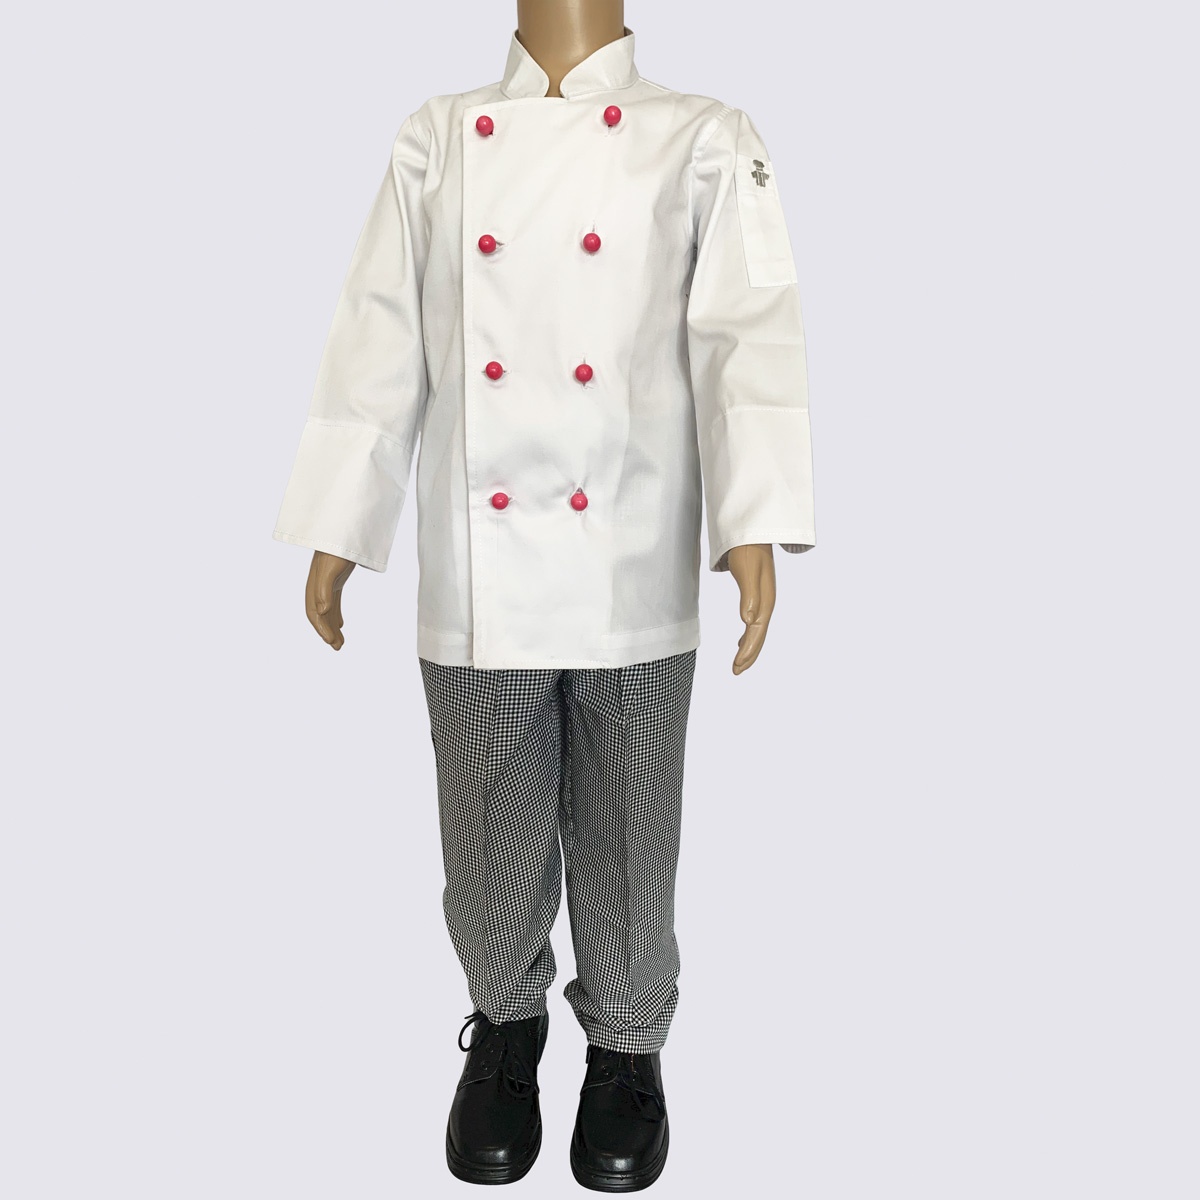 kids_chef_jacket_pink_buttons_and_chef_pant_set-t1200